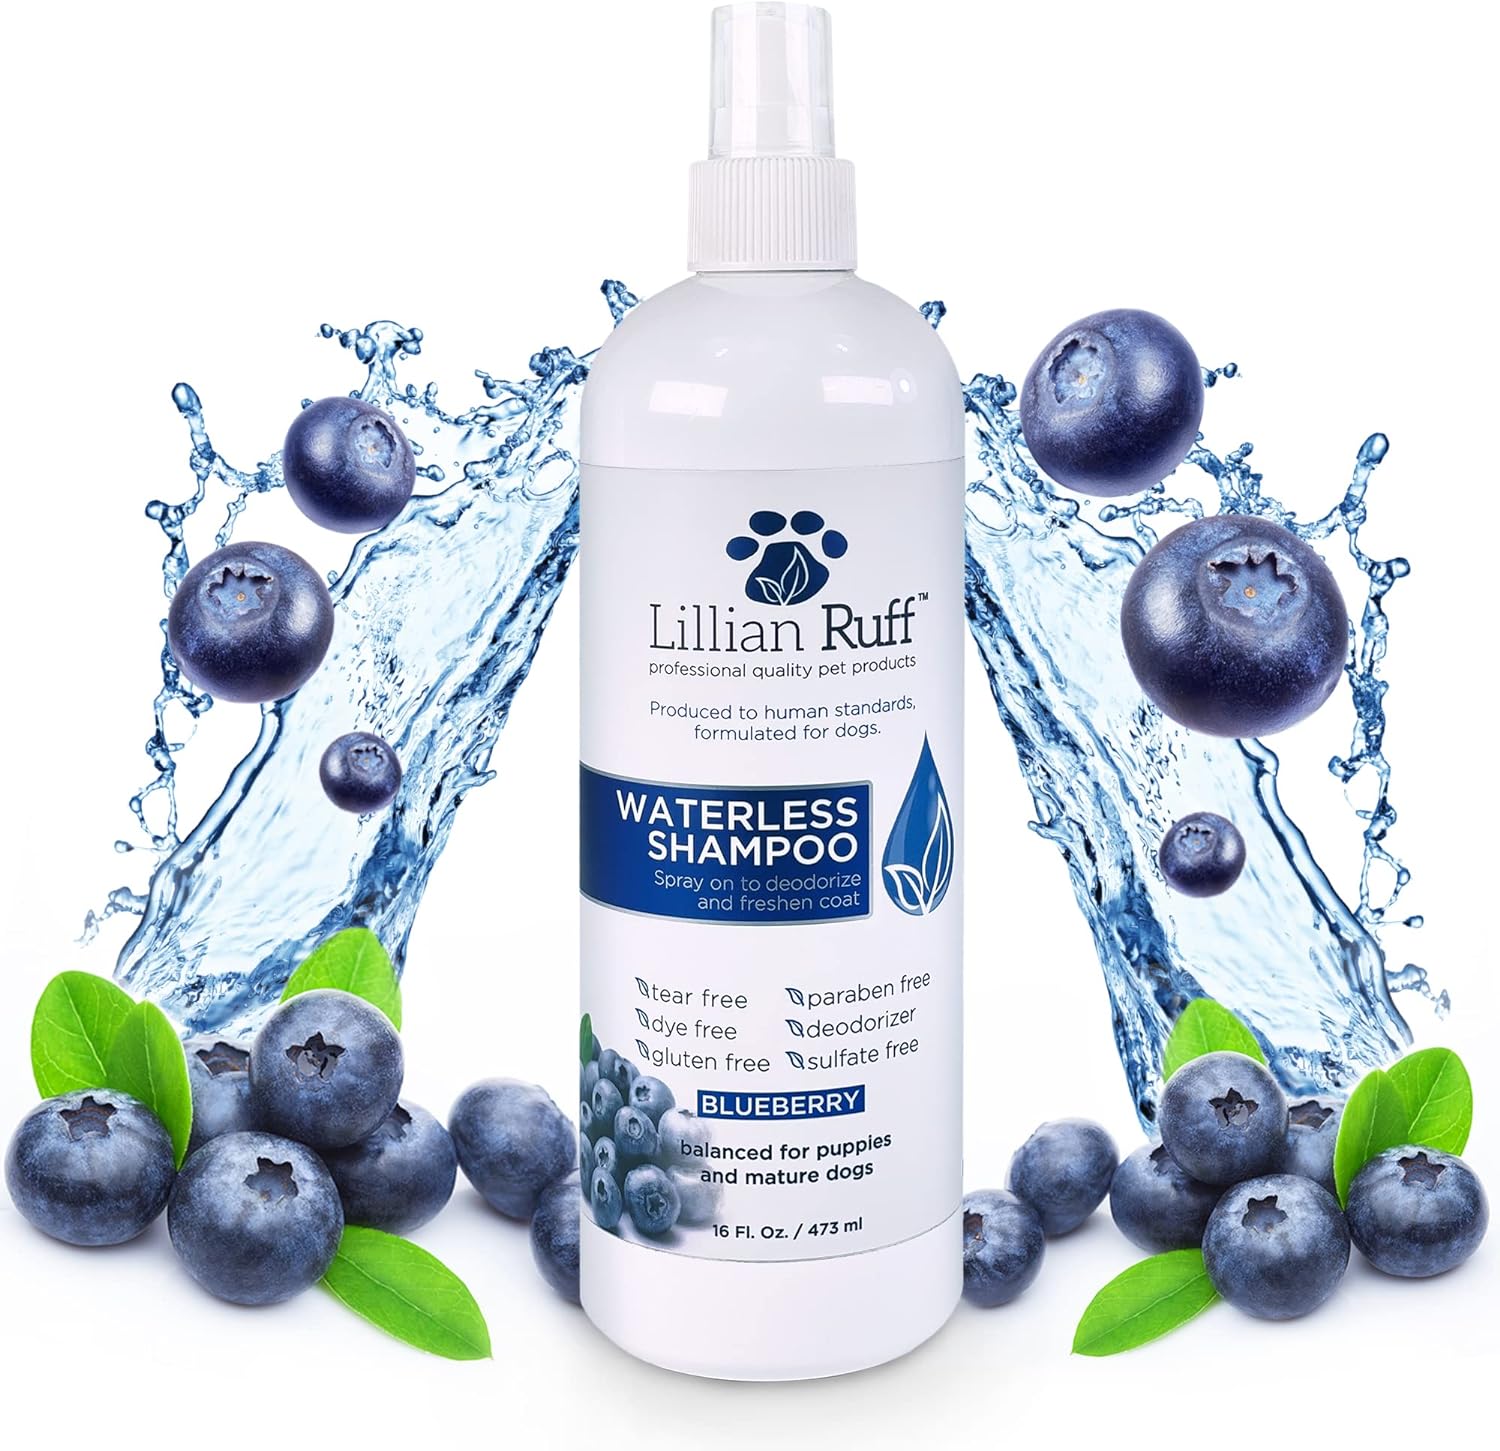 Waterless Dog Shampoo - No Rinse Quick Dry Shampoo Spray for Dogs and Cats - Tear Free Lavender Coconut Scent to Deodorize Pet Odor and Freshen Coat - Made in USA